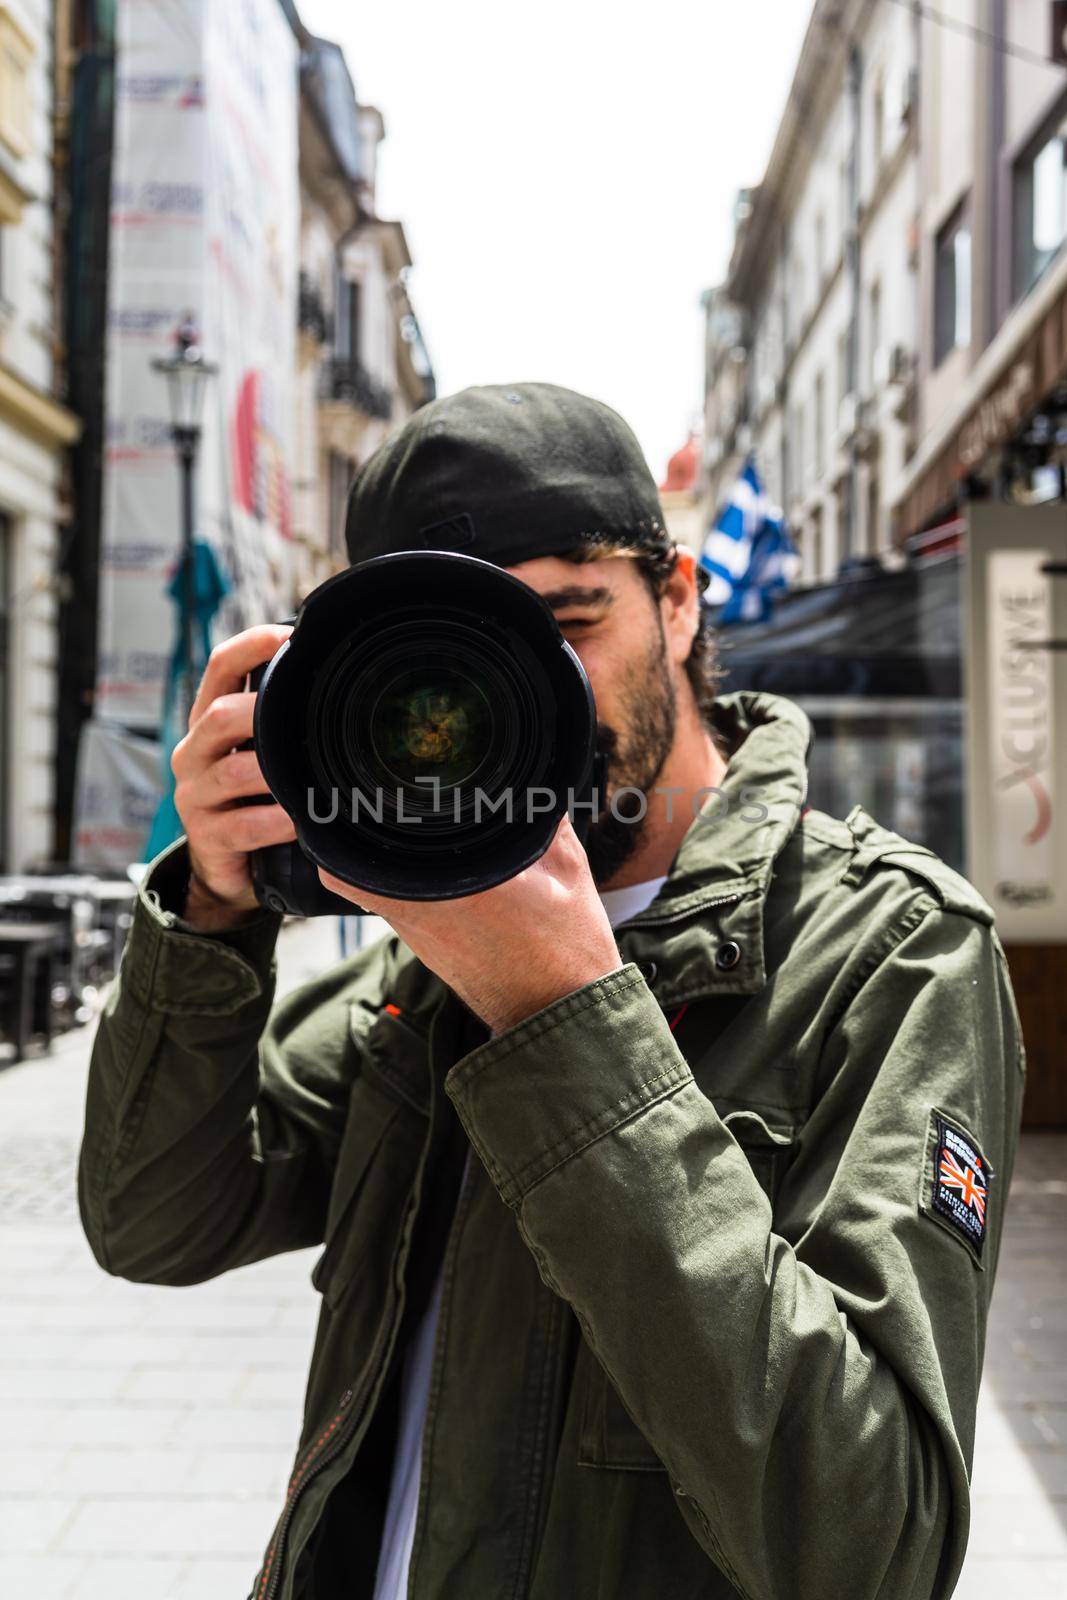 Street photographer taking photos with DSLR camera and telephoto lens in Old Town of Bucharest, Romania, 2020 by vladispas